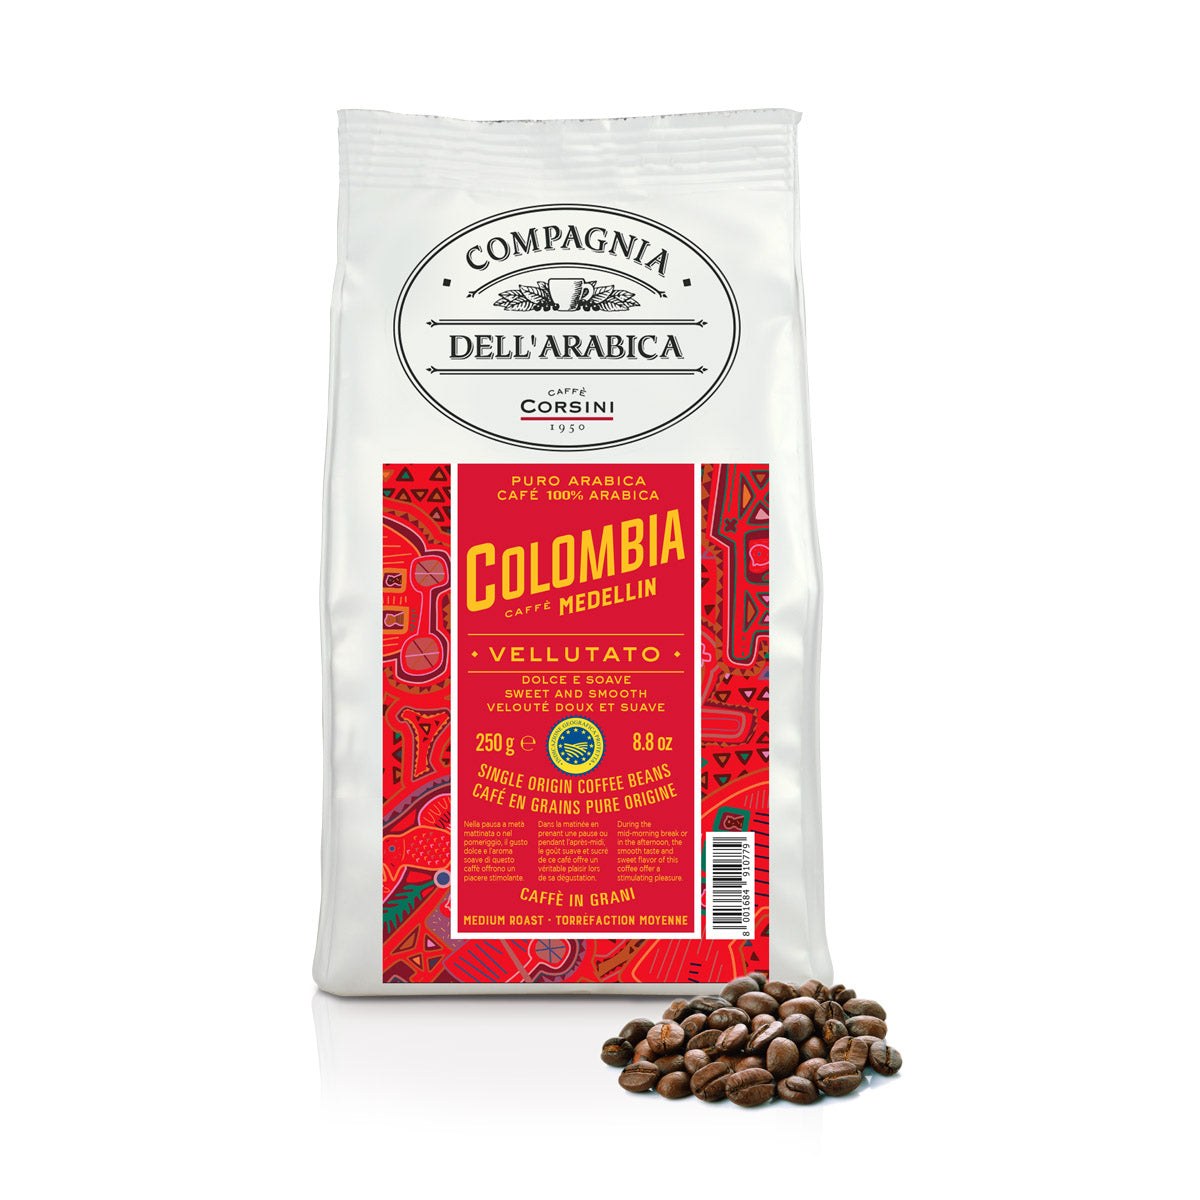 Coffee beans | Colombia Medellin | 100% Arabica | 250g | Box of 12 packs